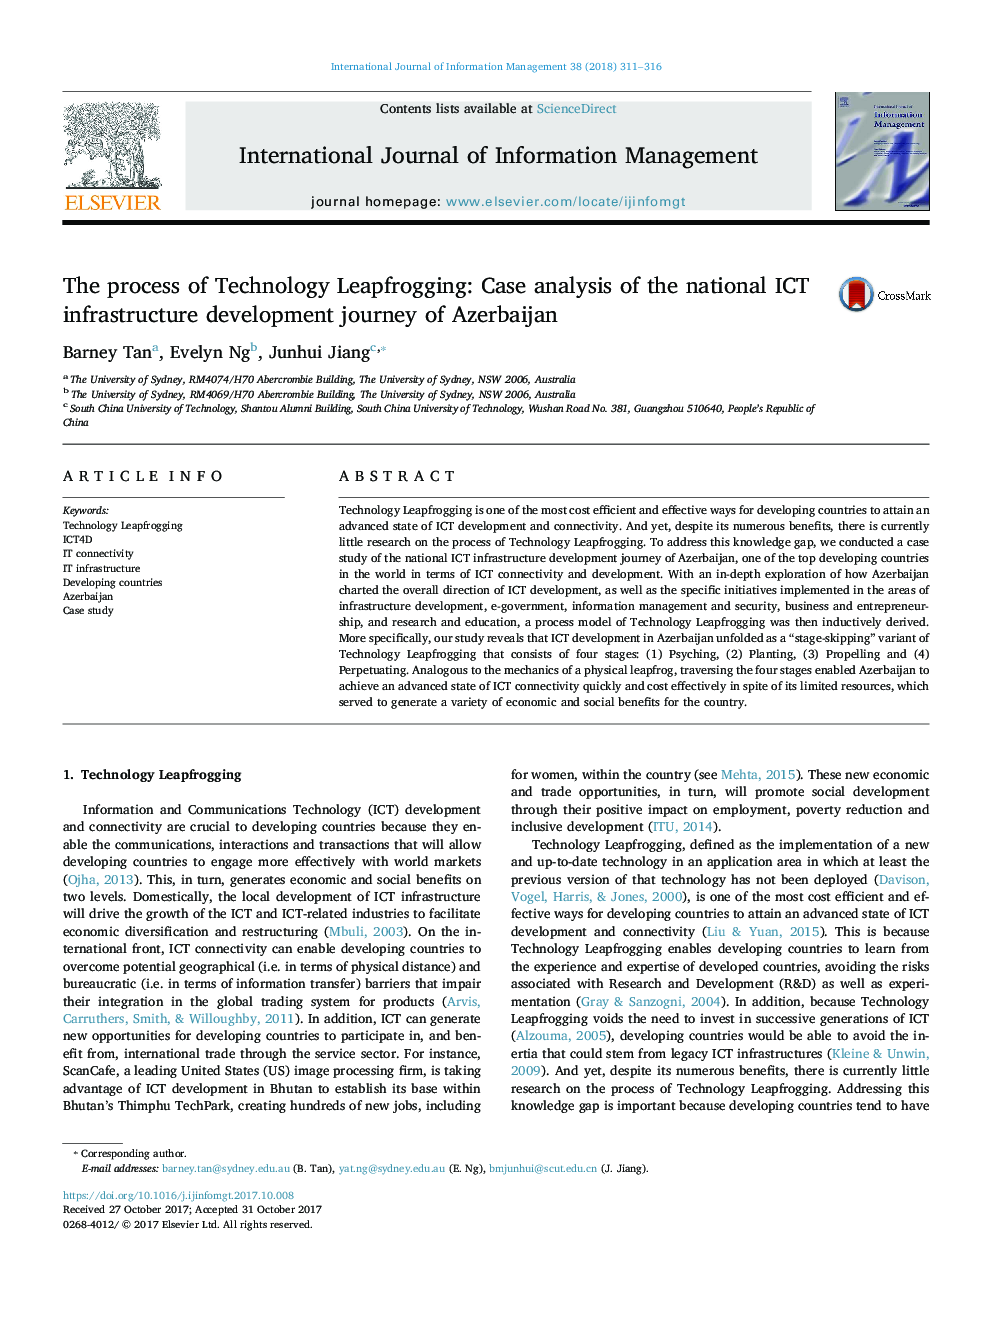 The process of Technology Leapfrogging: Case analysis of the national ICT infrastructure development journey of Azerbaijan